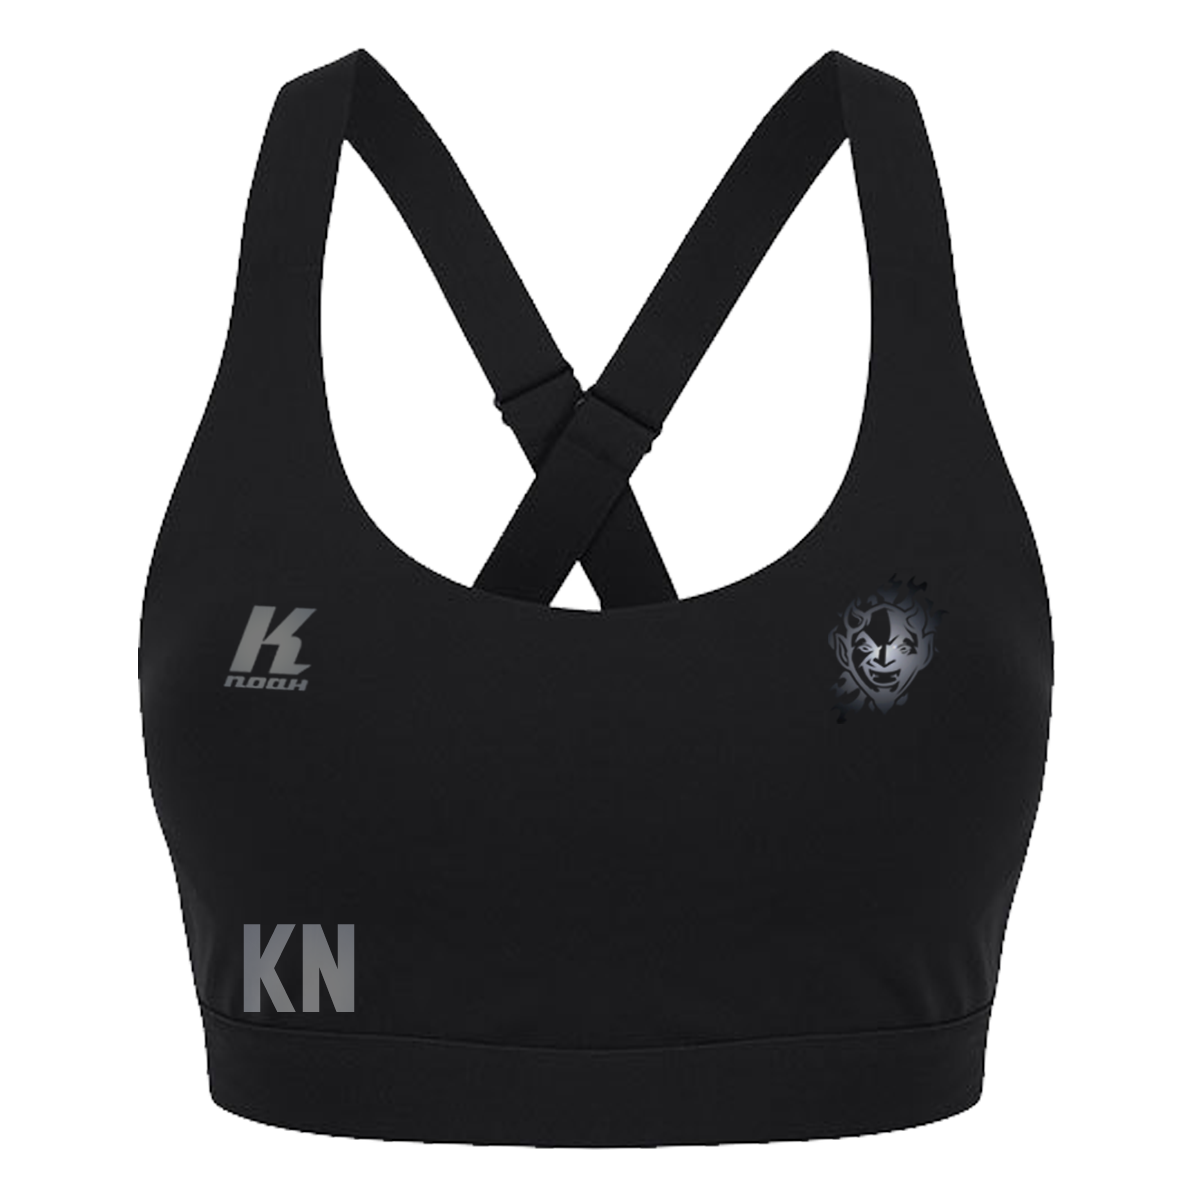 Demons "Blackline" Womens Impact Core Bra TL371 with Initials/Playernumber